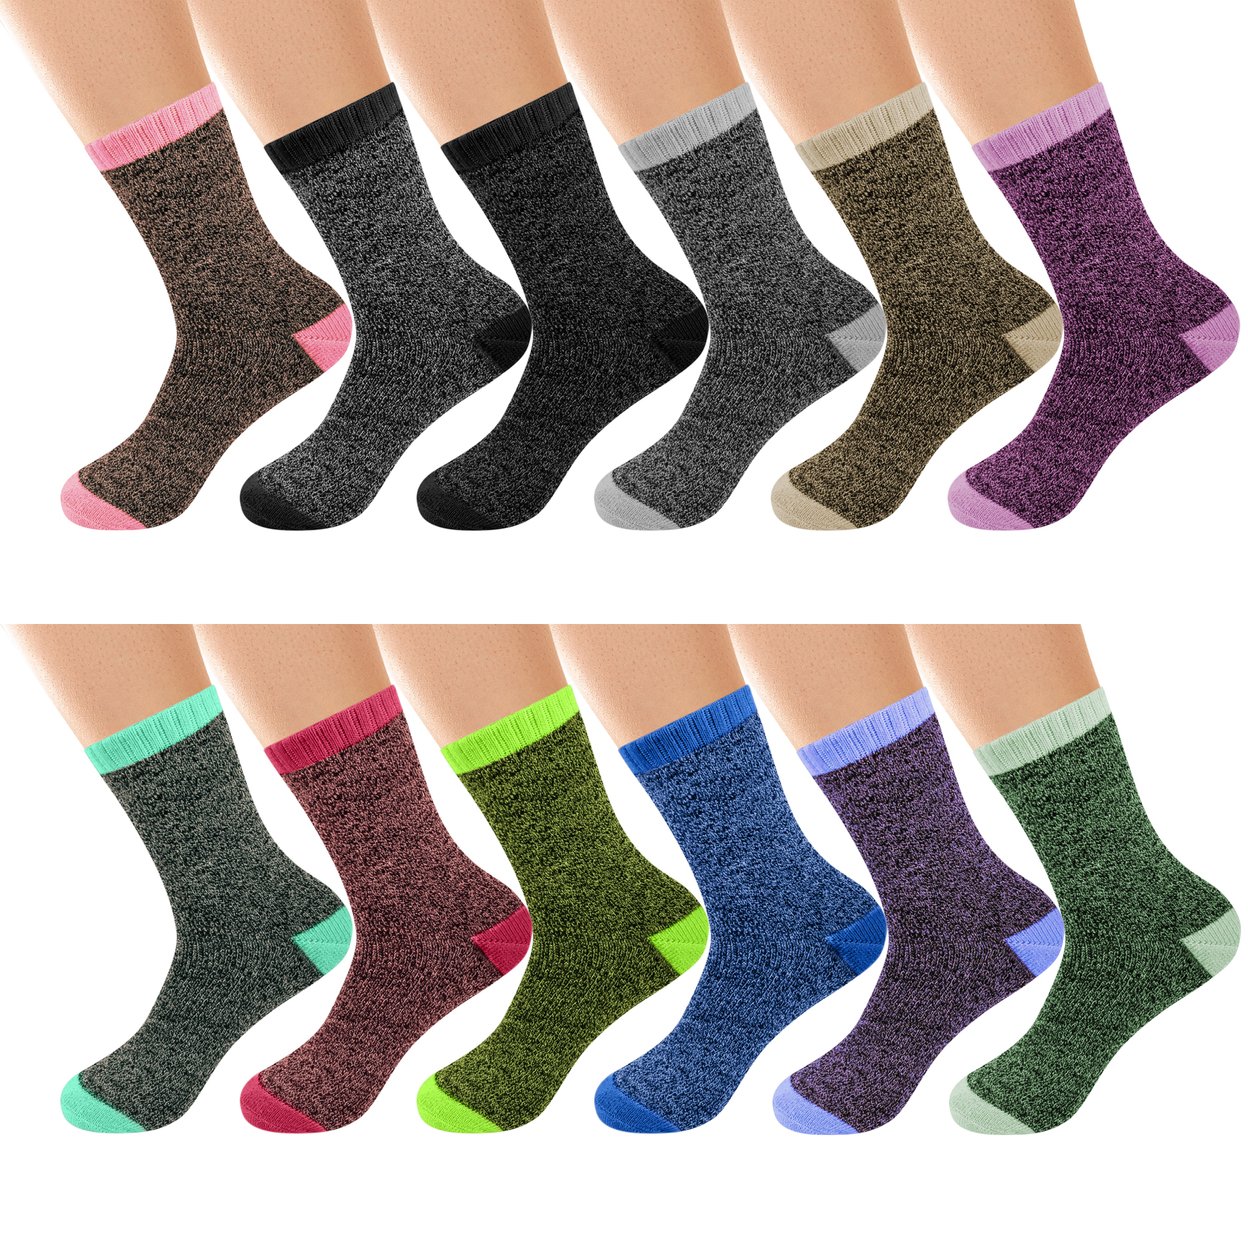 9-Pairs: Women's Winter Warm Thick Soft Cozy Thermal Boot Socks